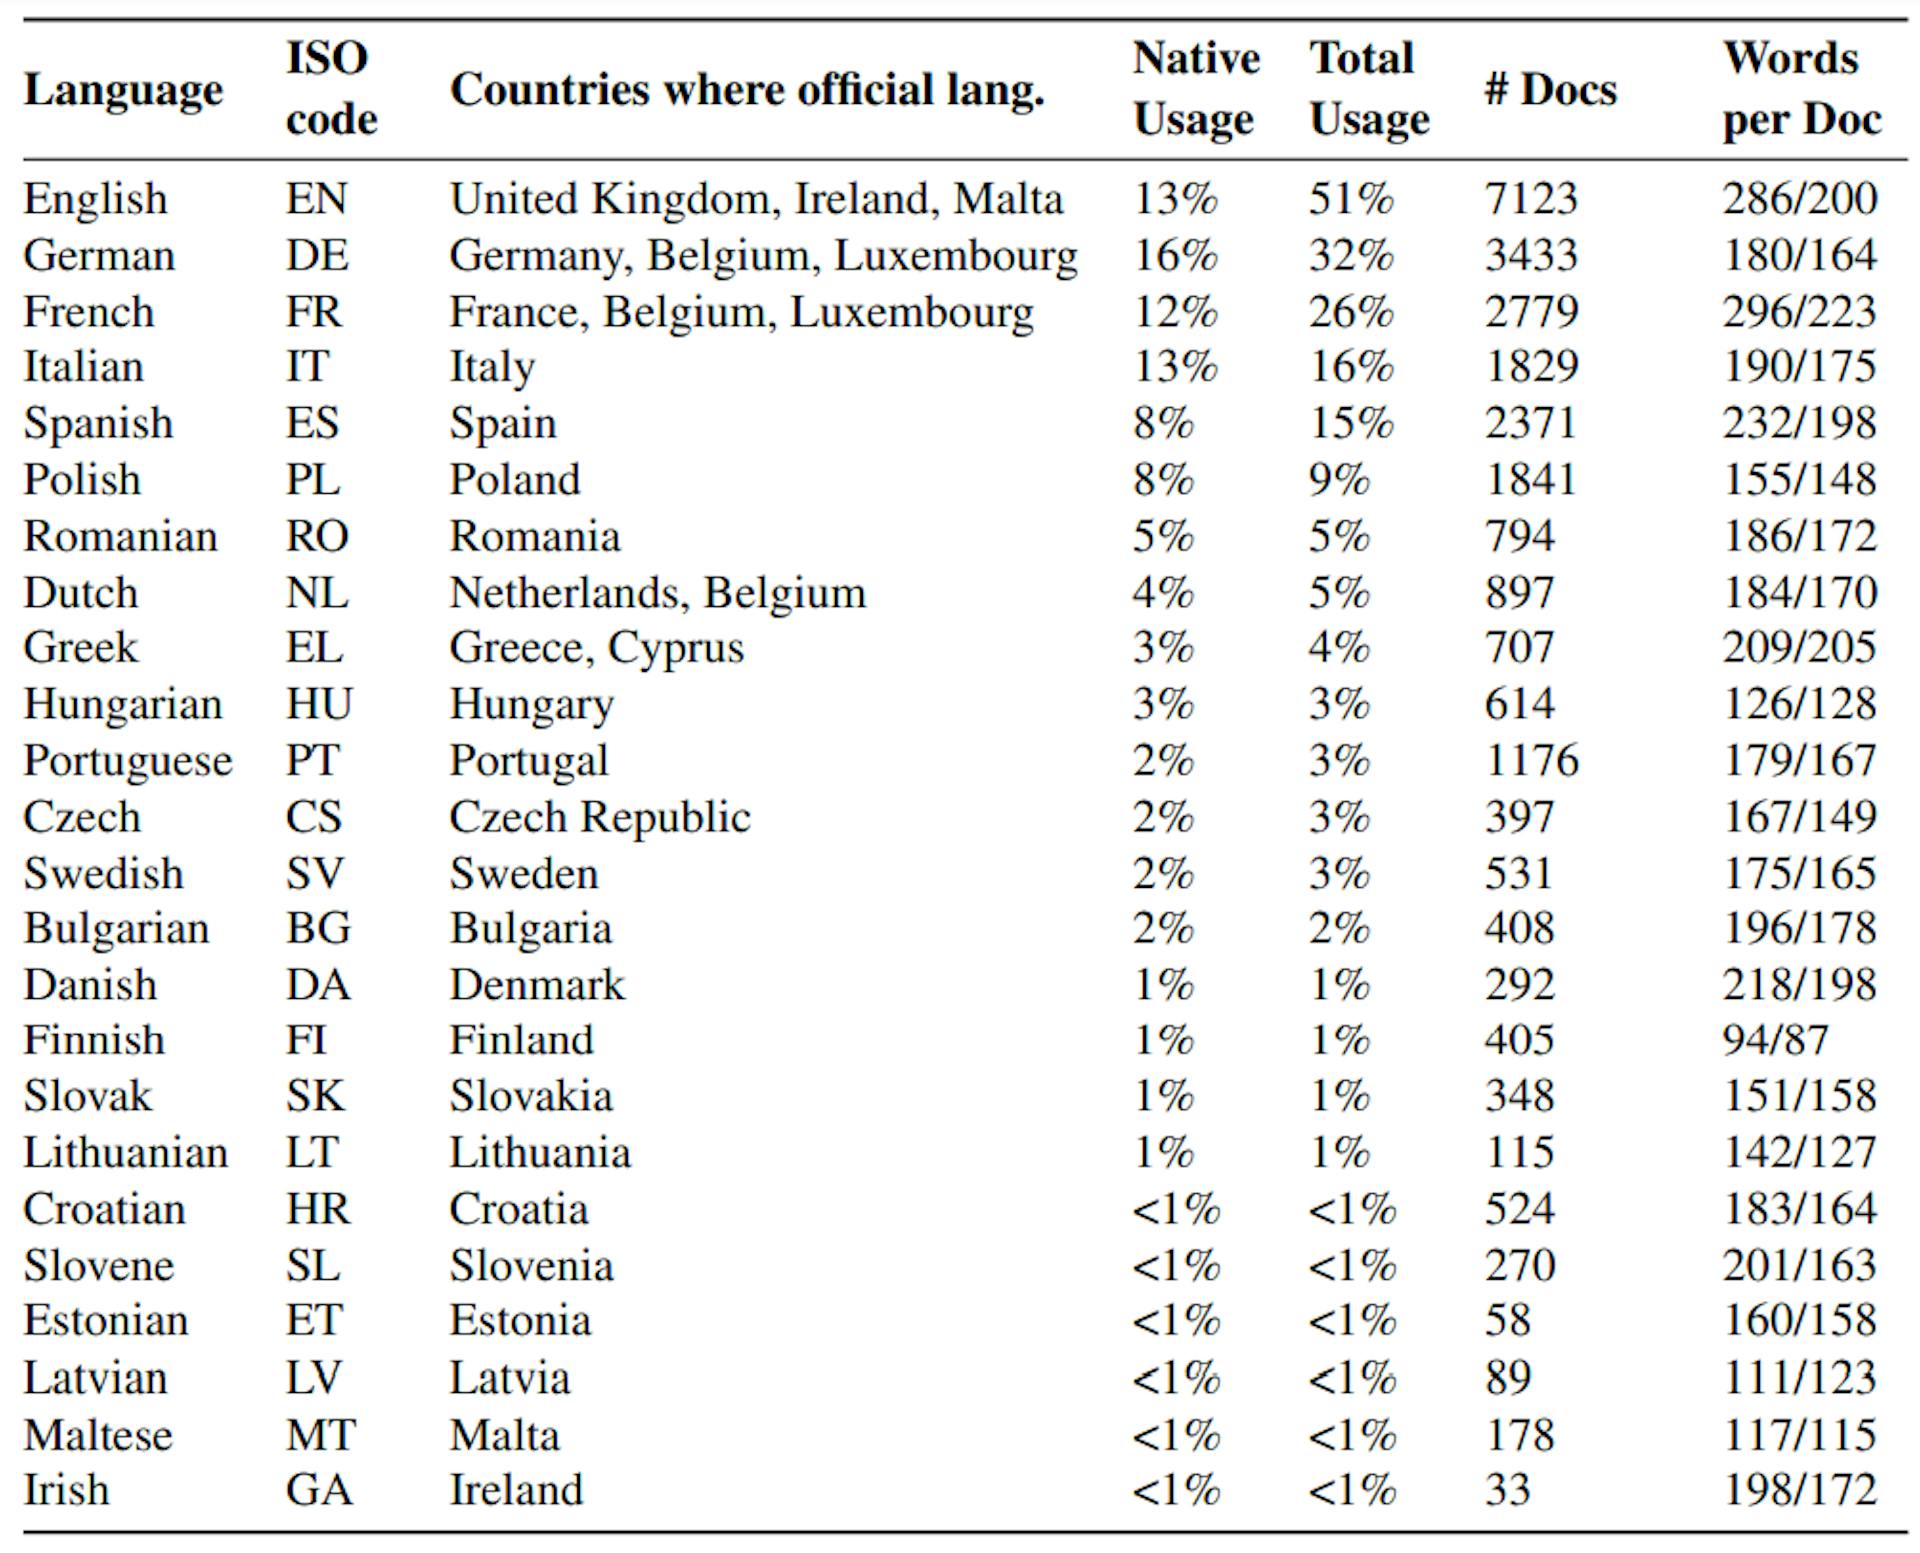 Table 1: Multi-EuP statistics, broken down by language: ISO language code; EU member states using the language officially; proportion of the EU population speaking the language (Chalkidis et al., 2021); number of debate speech documents; and words per document (mean/median).